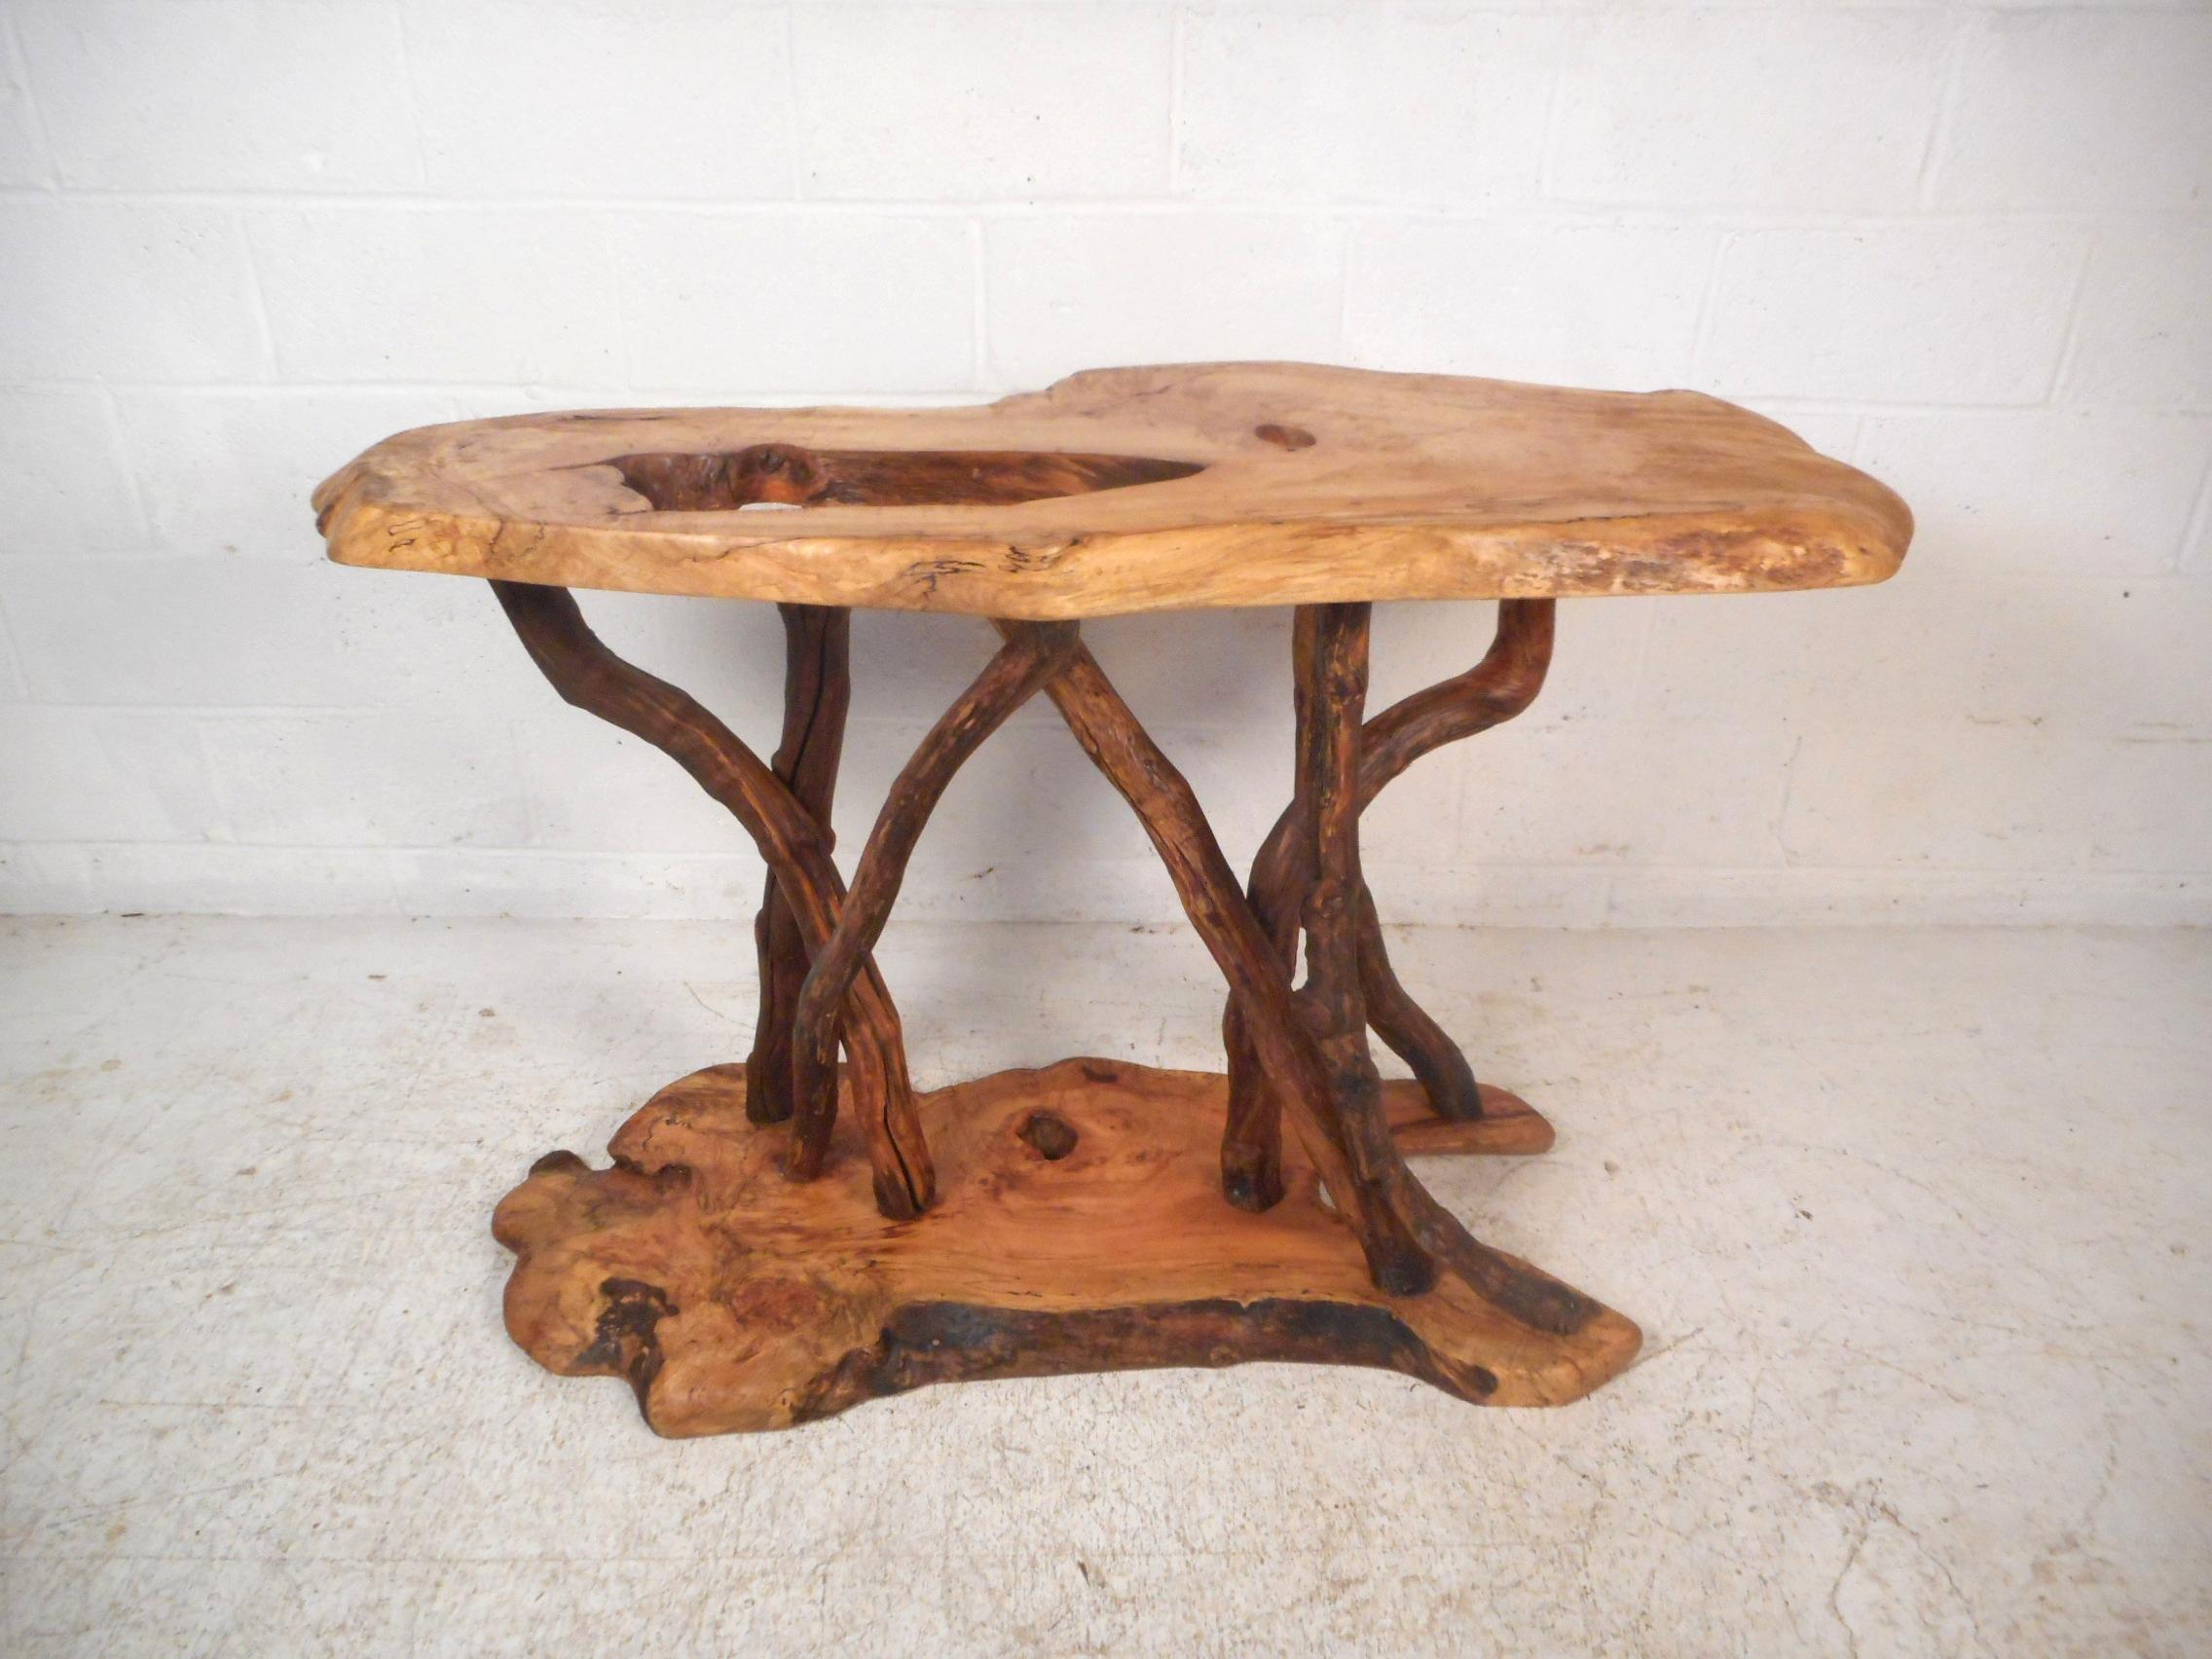 Very unusual vintage live-edge console table. Stunning wood texture and wild yet sturdy supports connecting the base and tabletop. An interesting piece sure to add a lively dimension to any decor. Please confirm item location with dealer (NJ or NY).